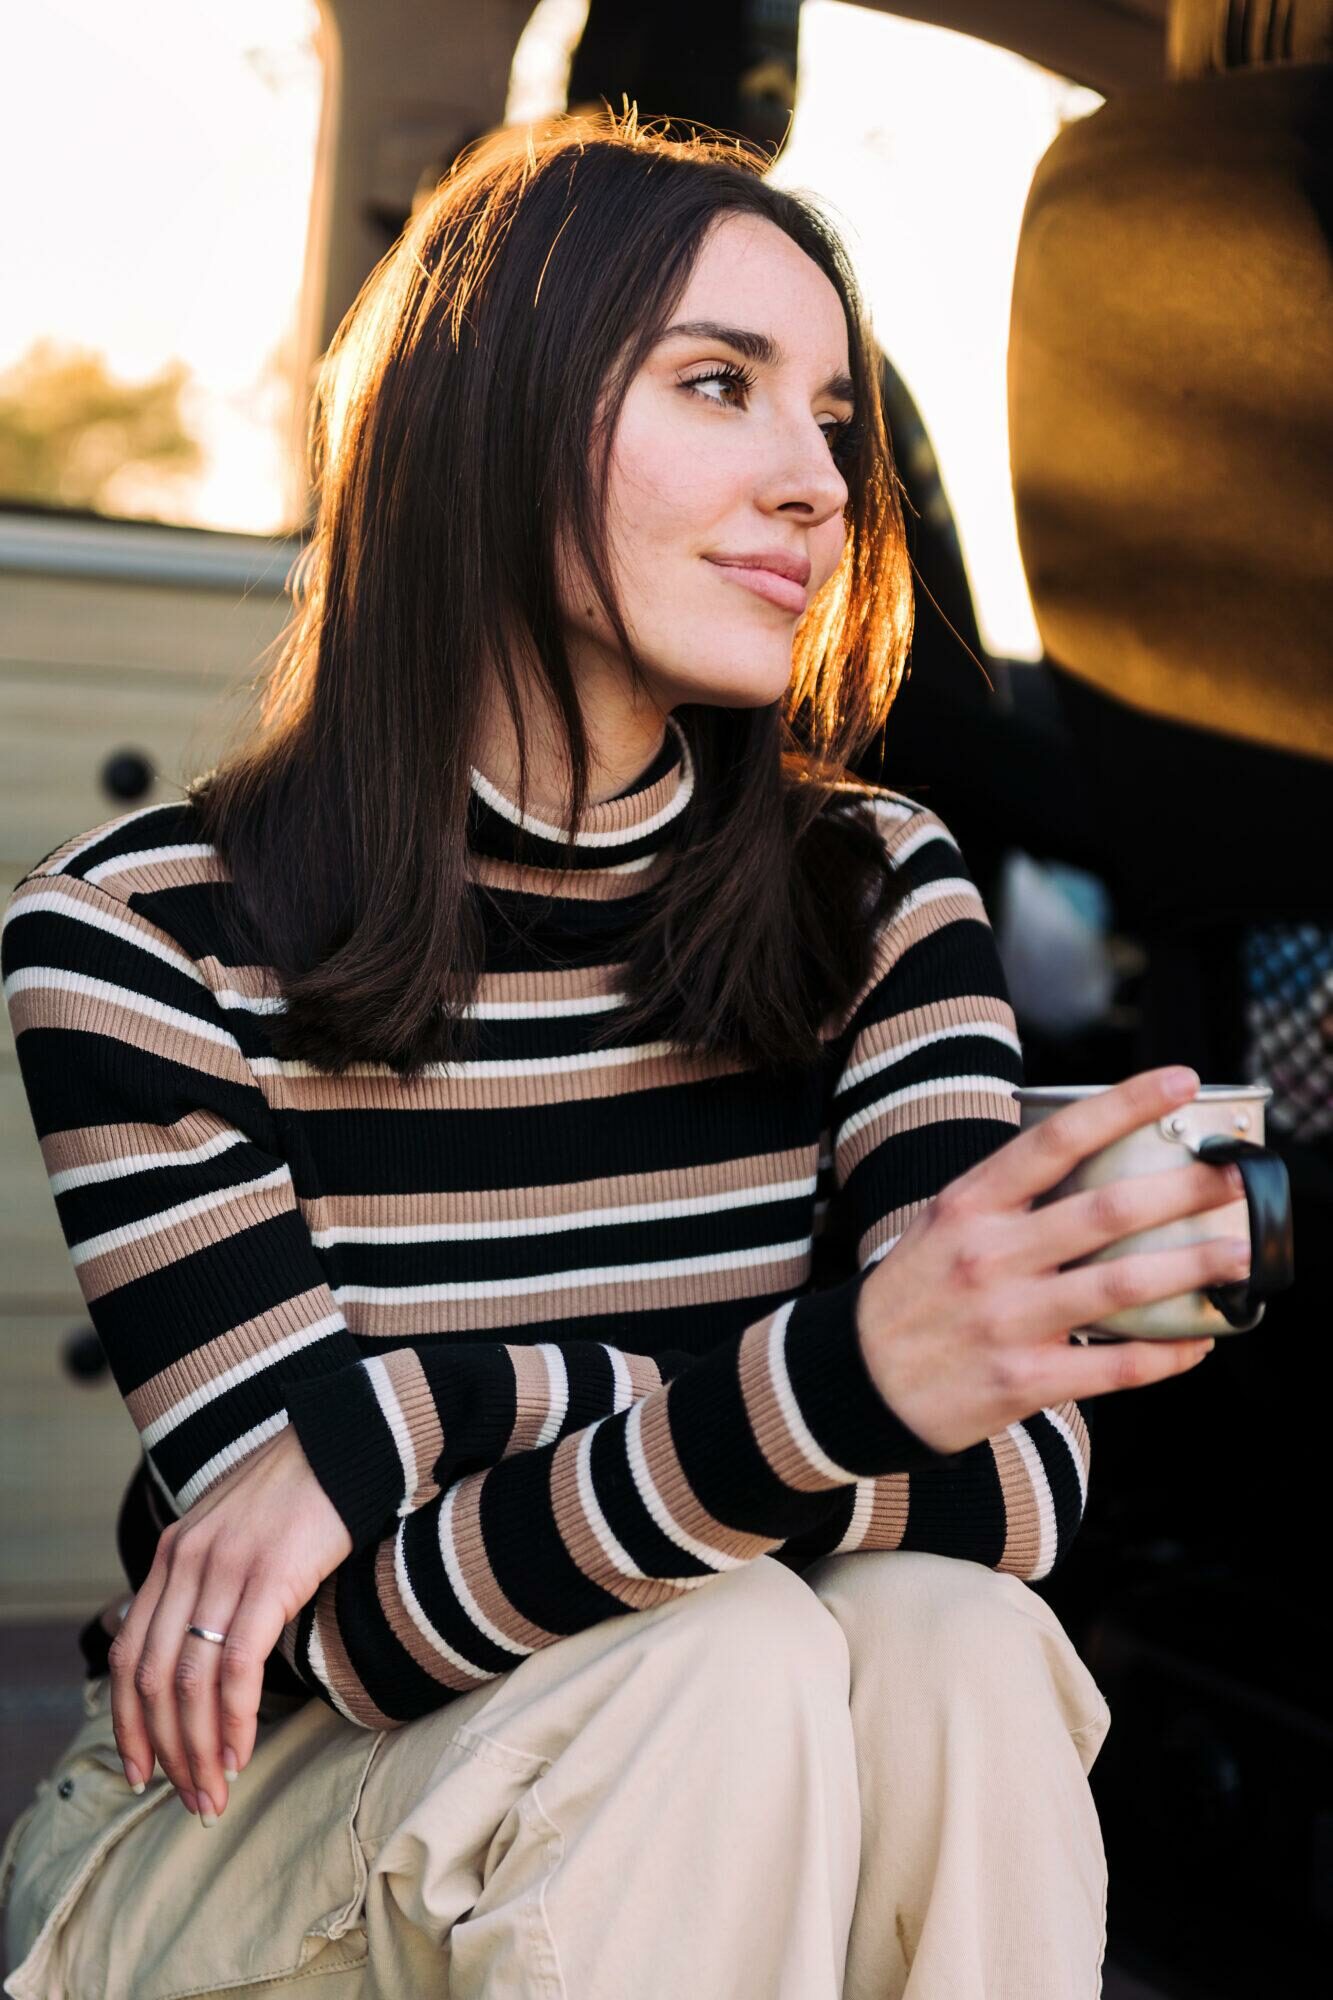 woman smiling happy drinking a cup of coffee